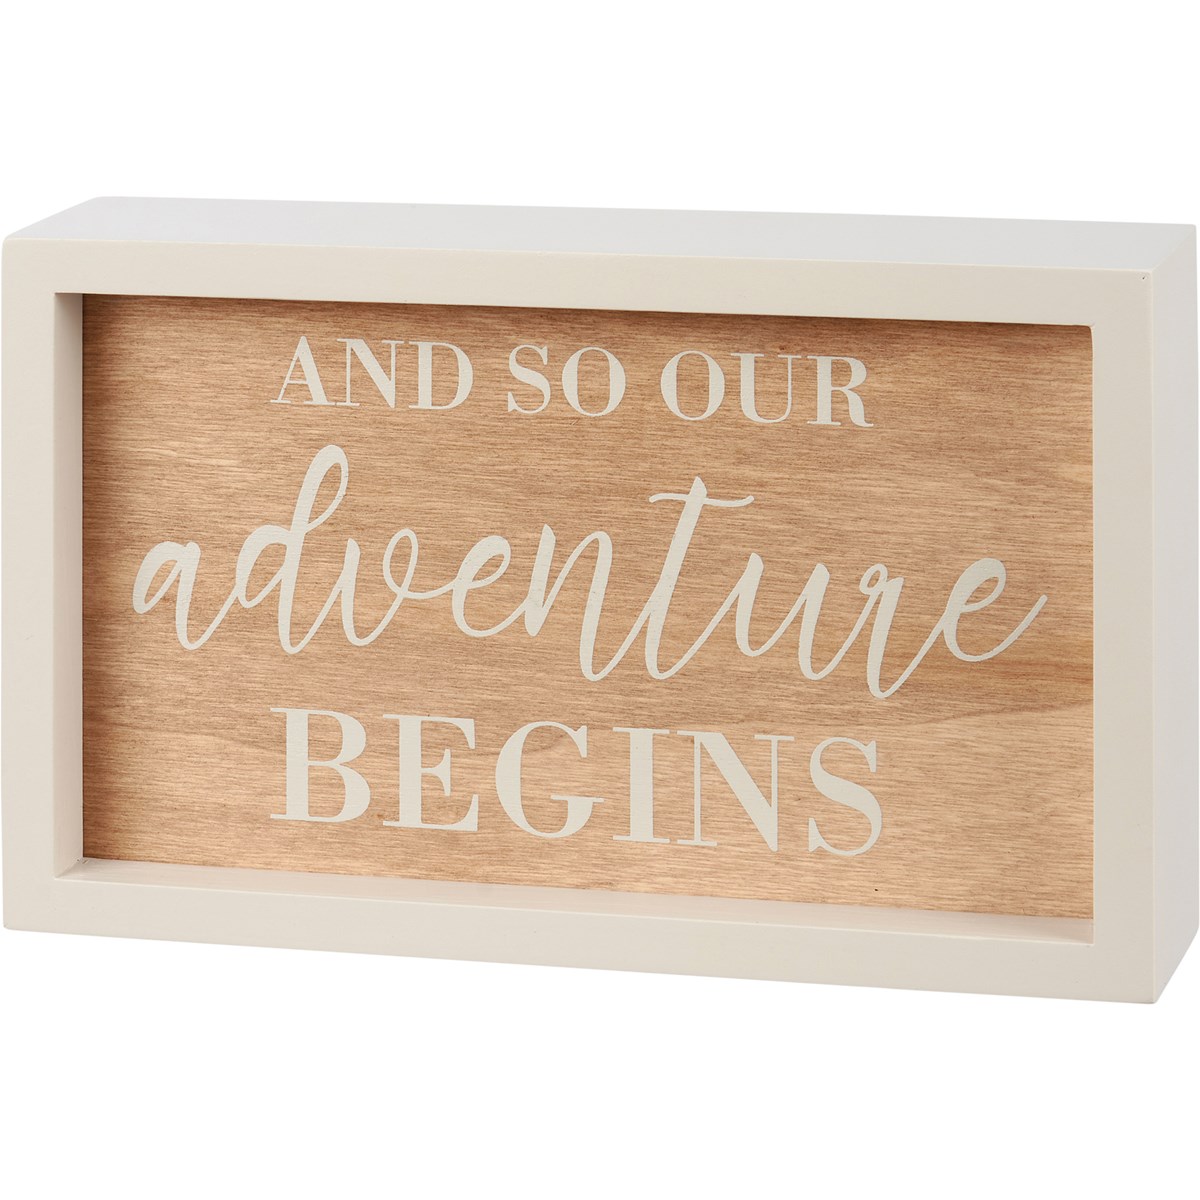 Our Adventure Begins Inset Box Sign - Wood